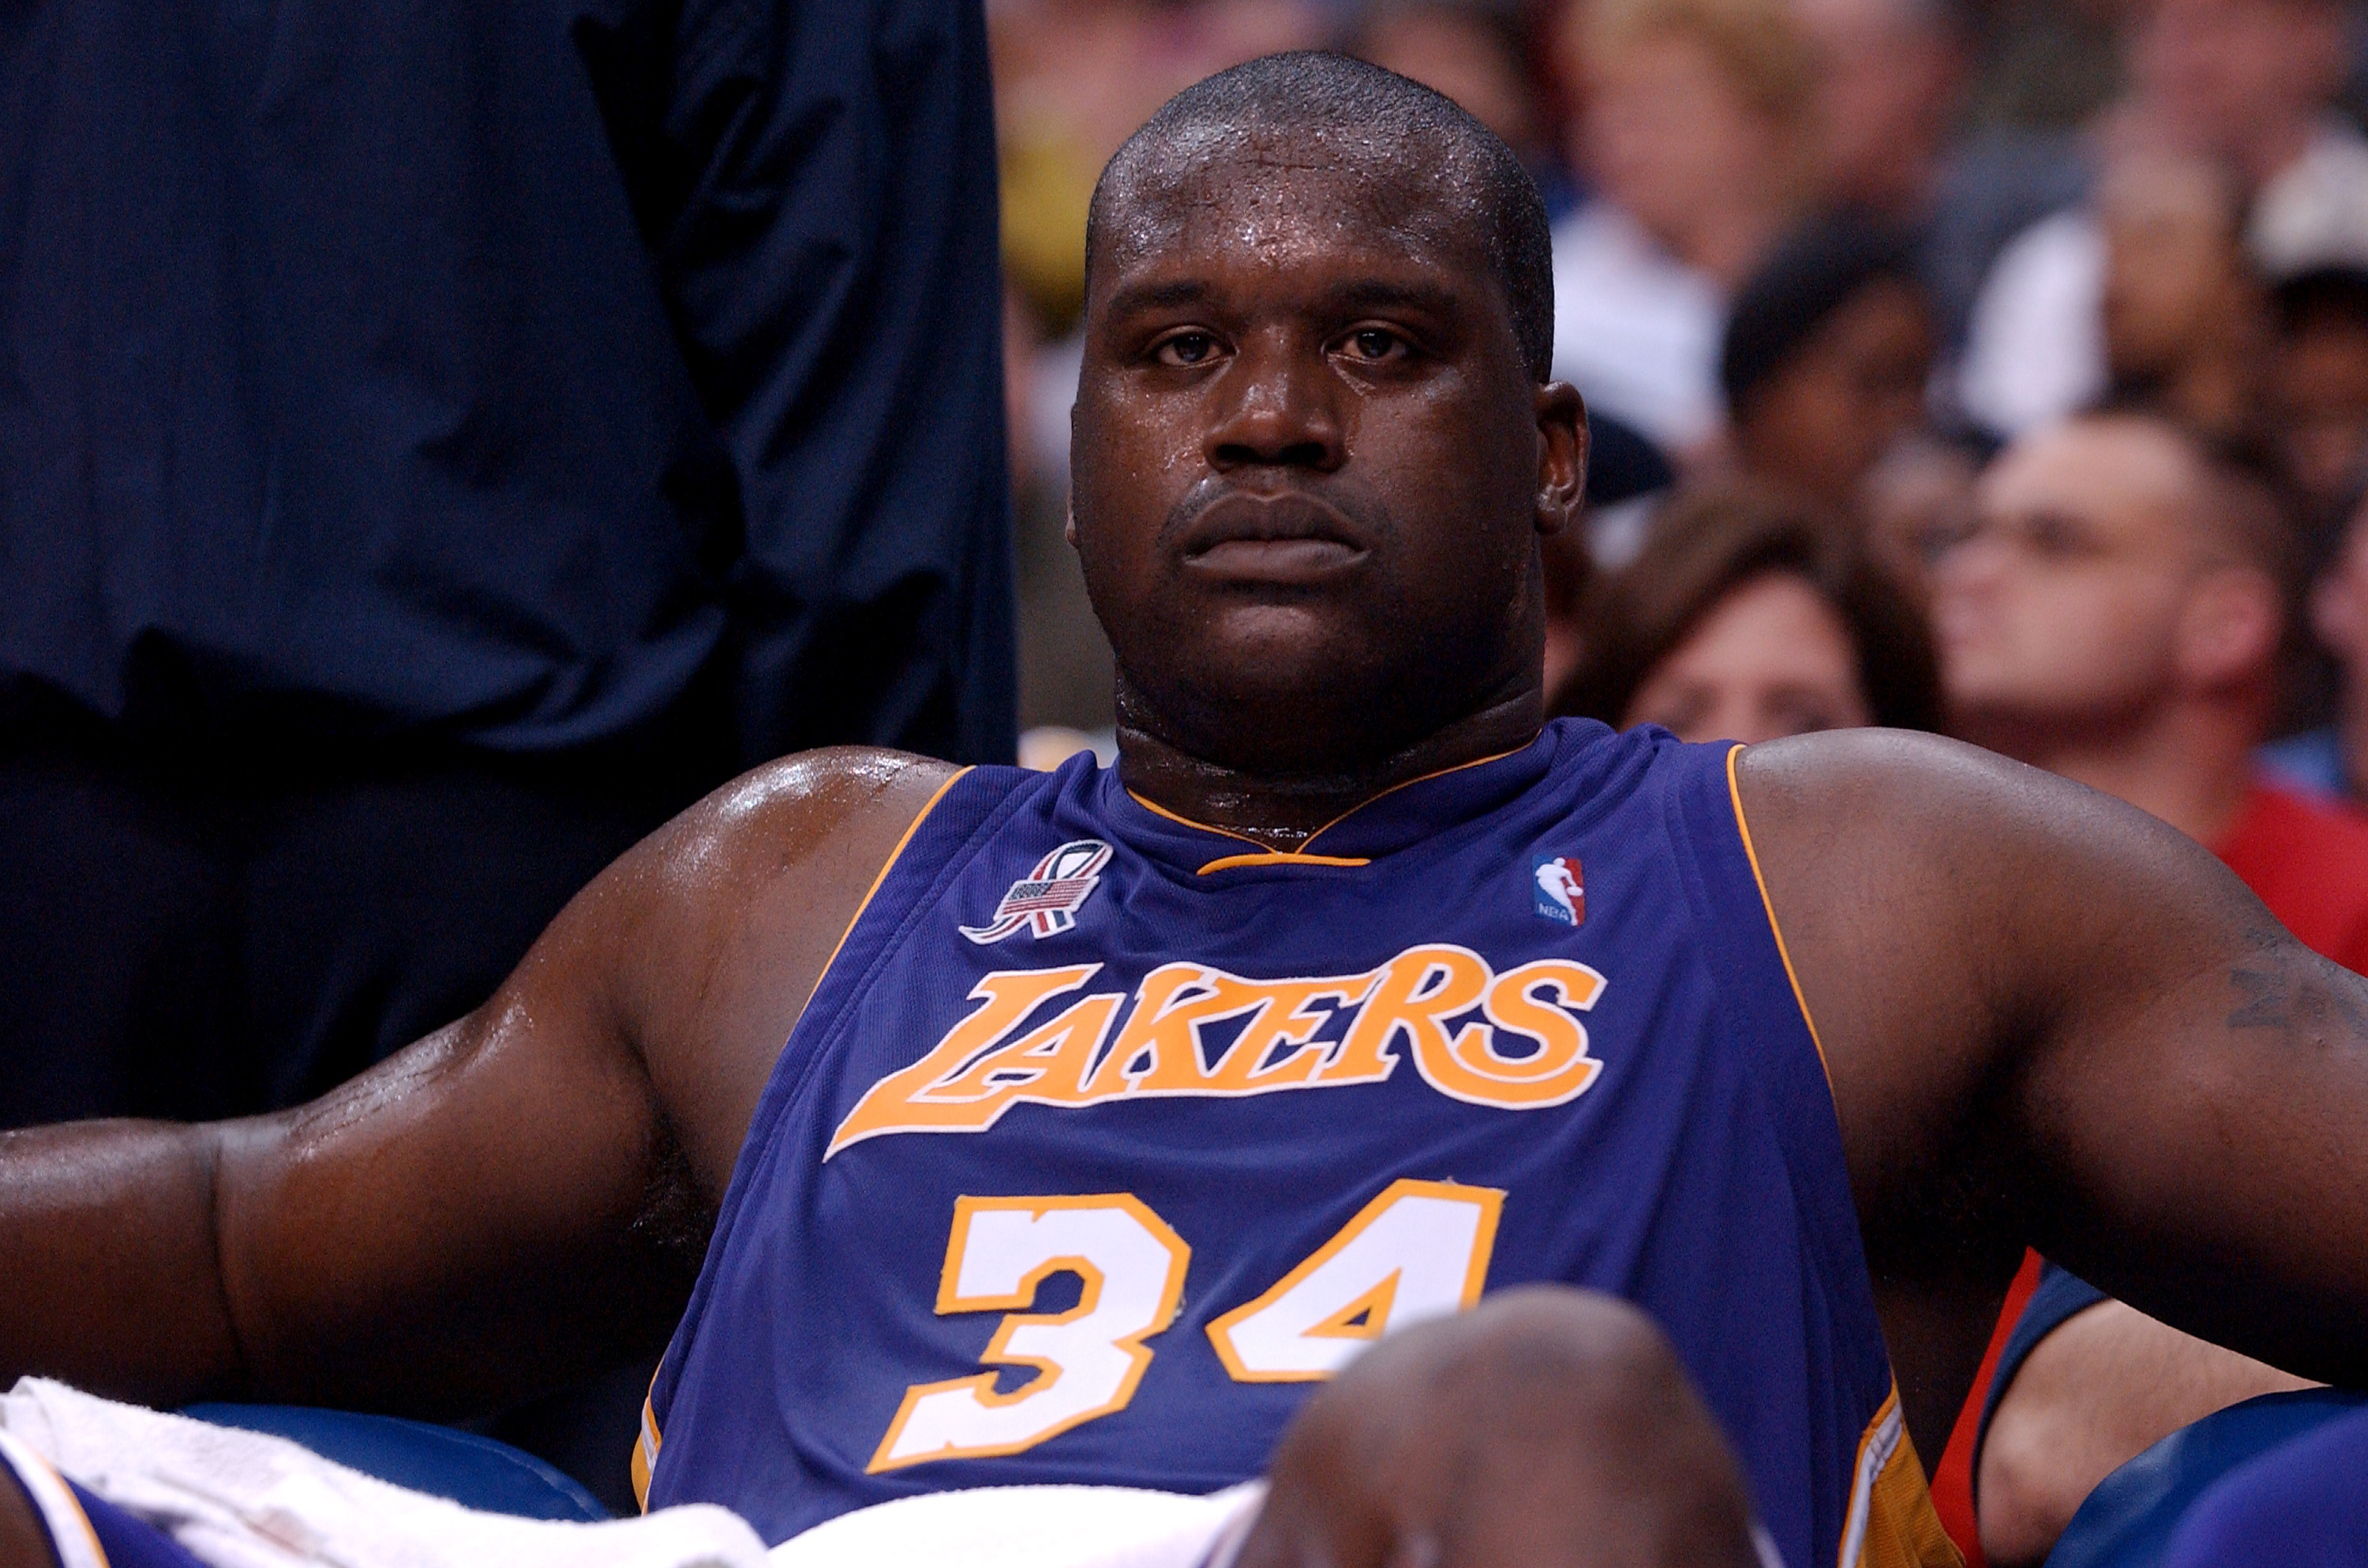 Former Los Angeles Lakers center Shaquille O'Neal looks on from the bench during an NBA game in April 2002